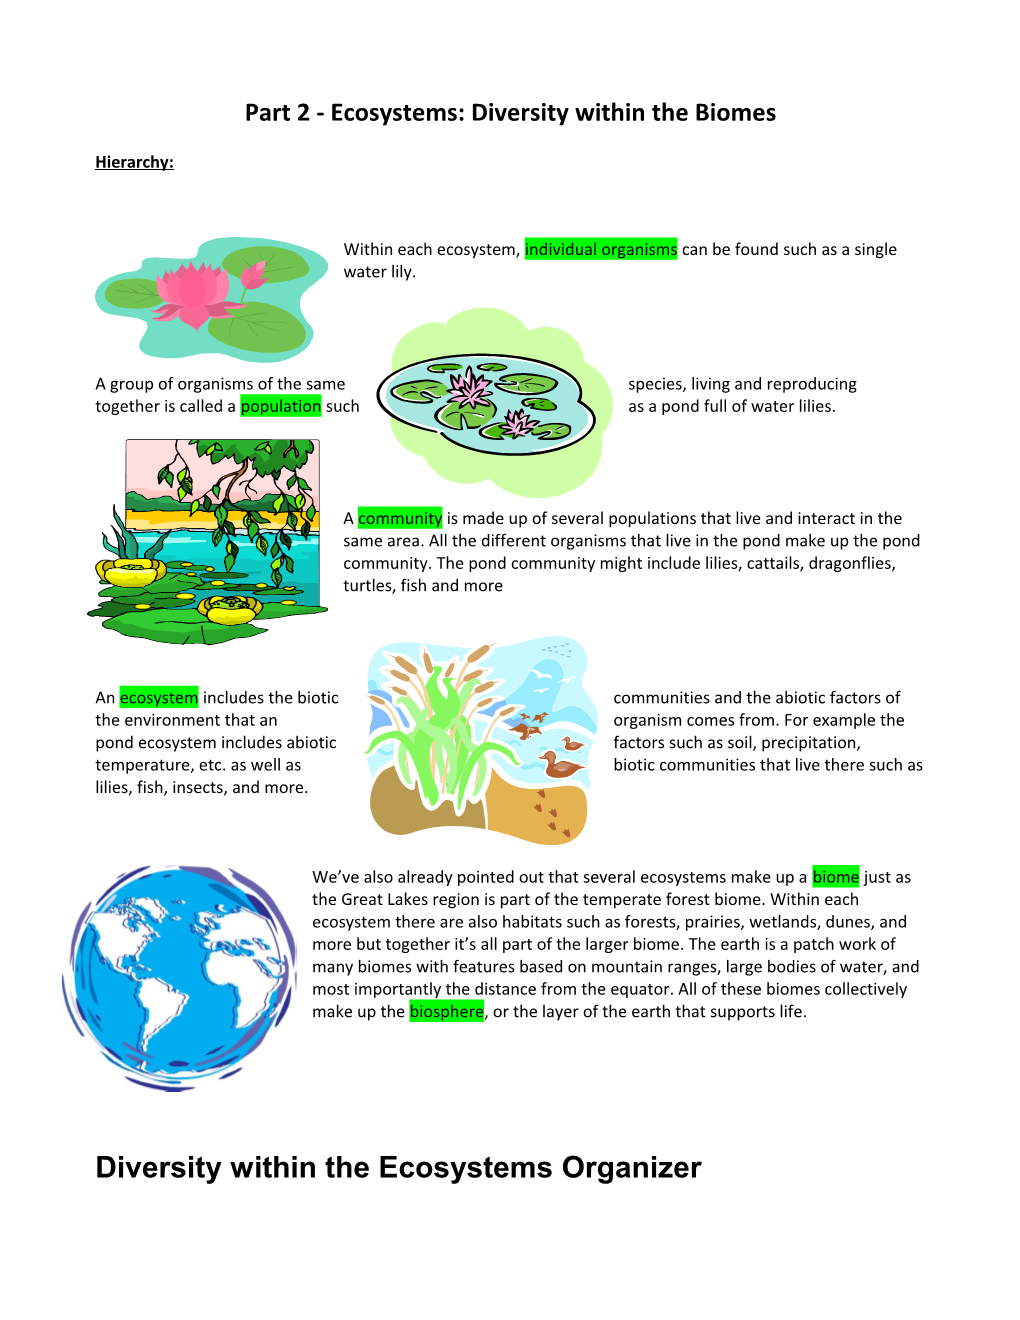 Part 2 - Ecosystems: Diversity Within the Biomes